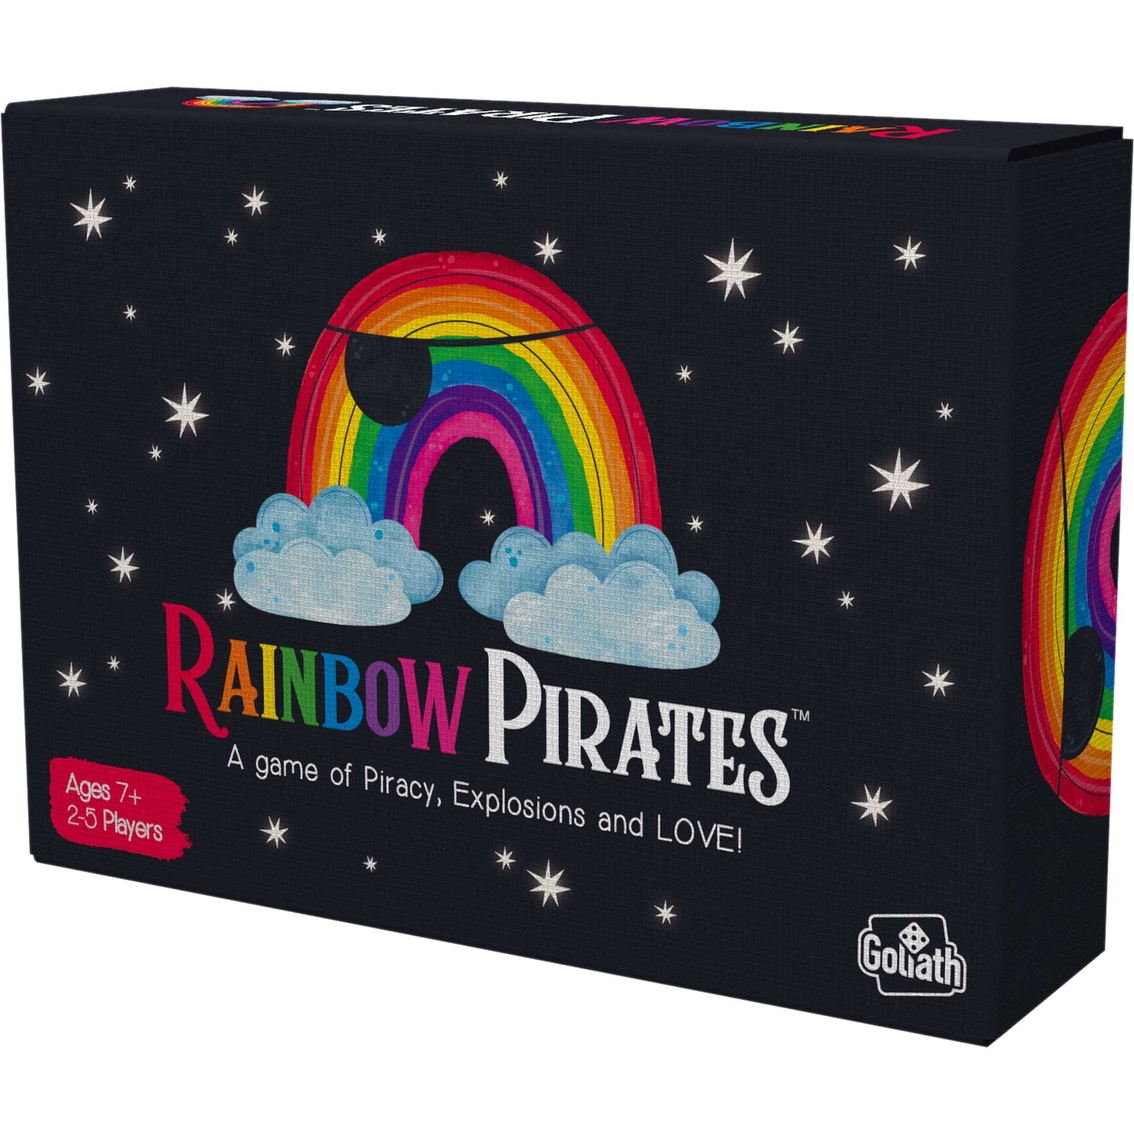 Goliath Games Rainbow Pirates Card Game - Image 2 of 3